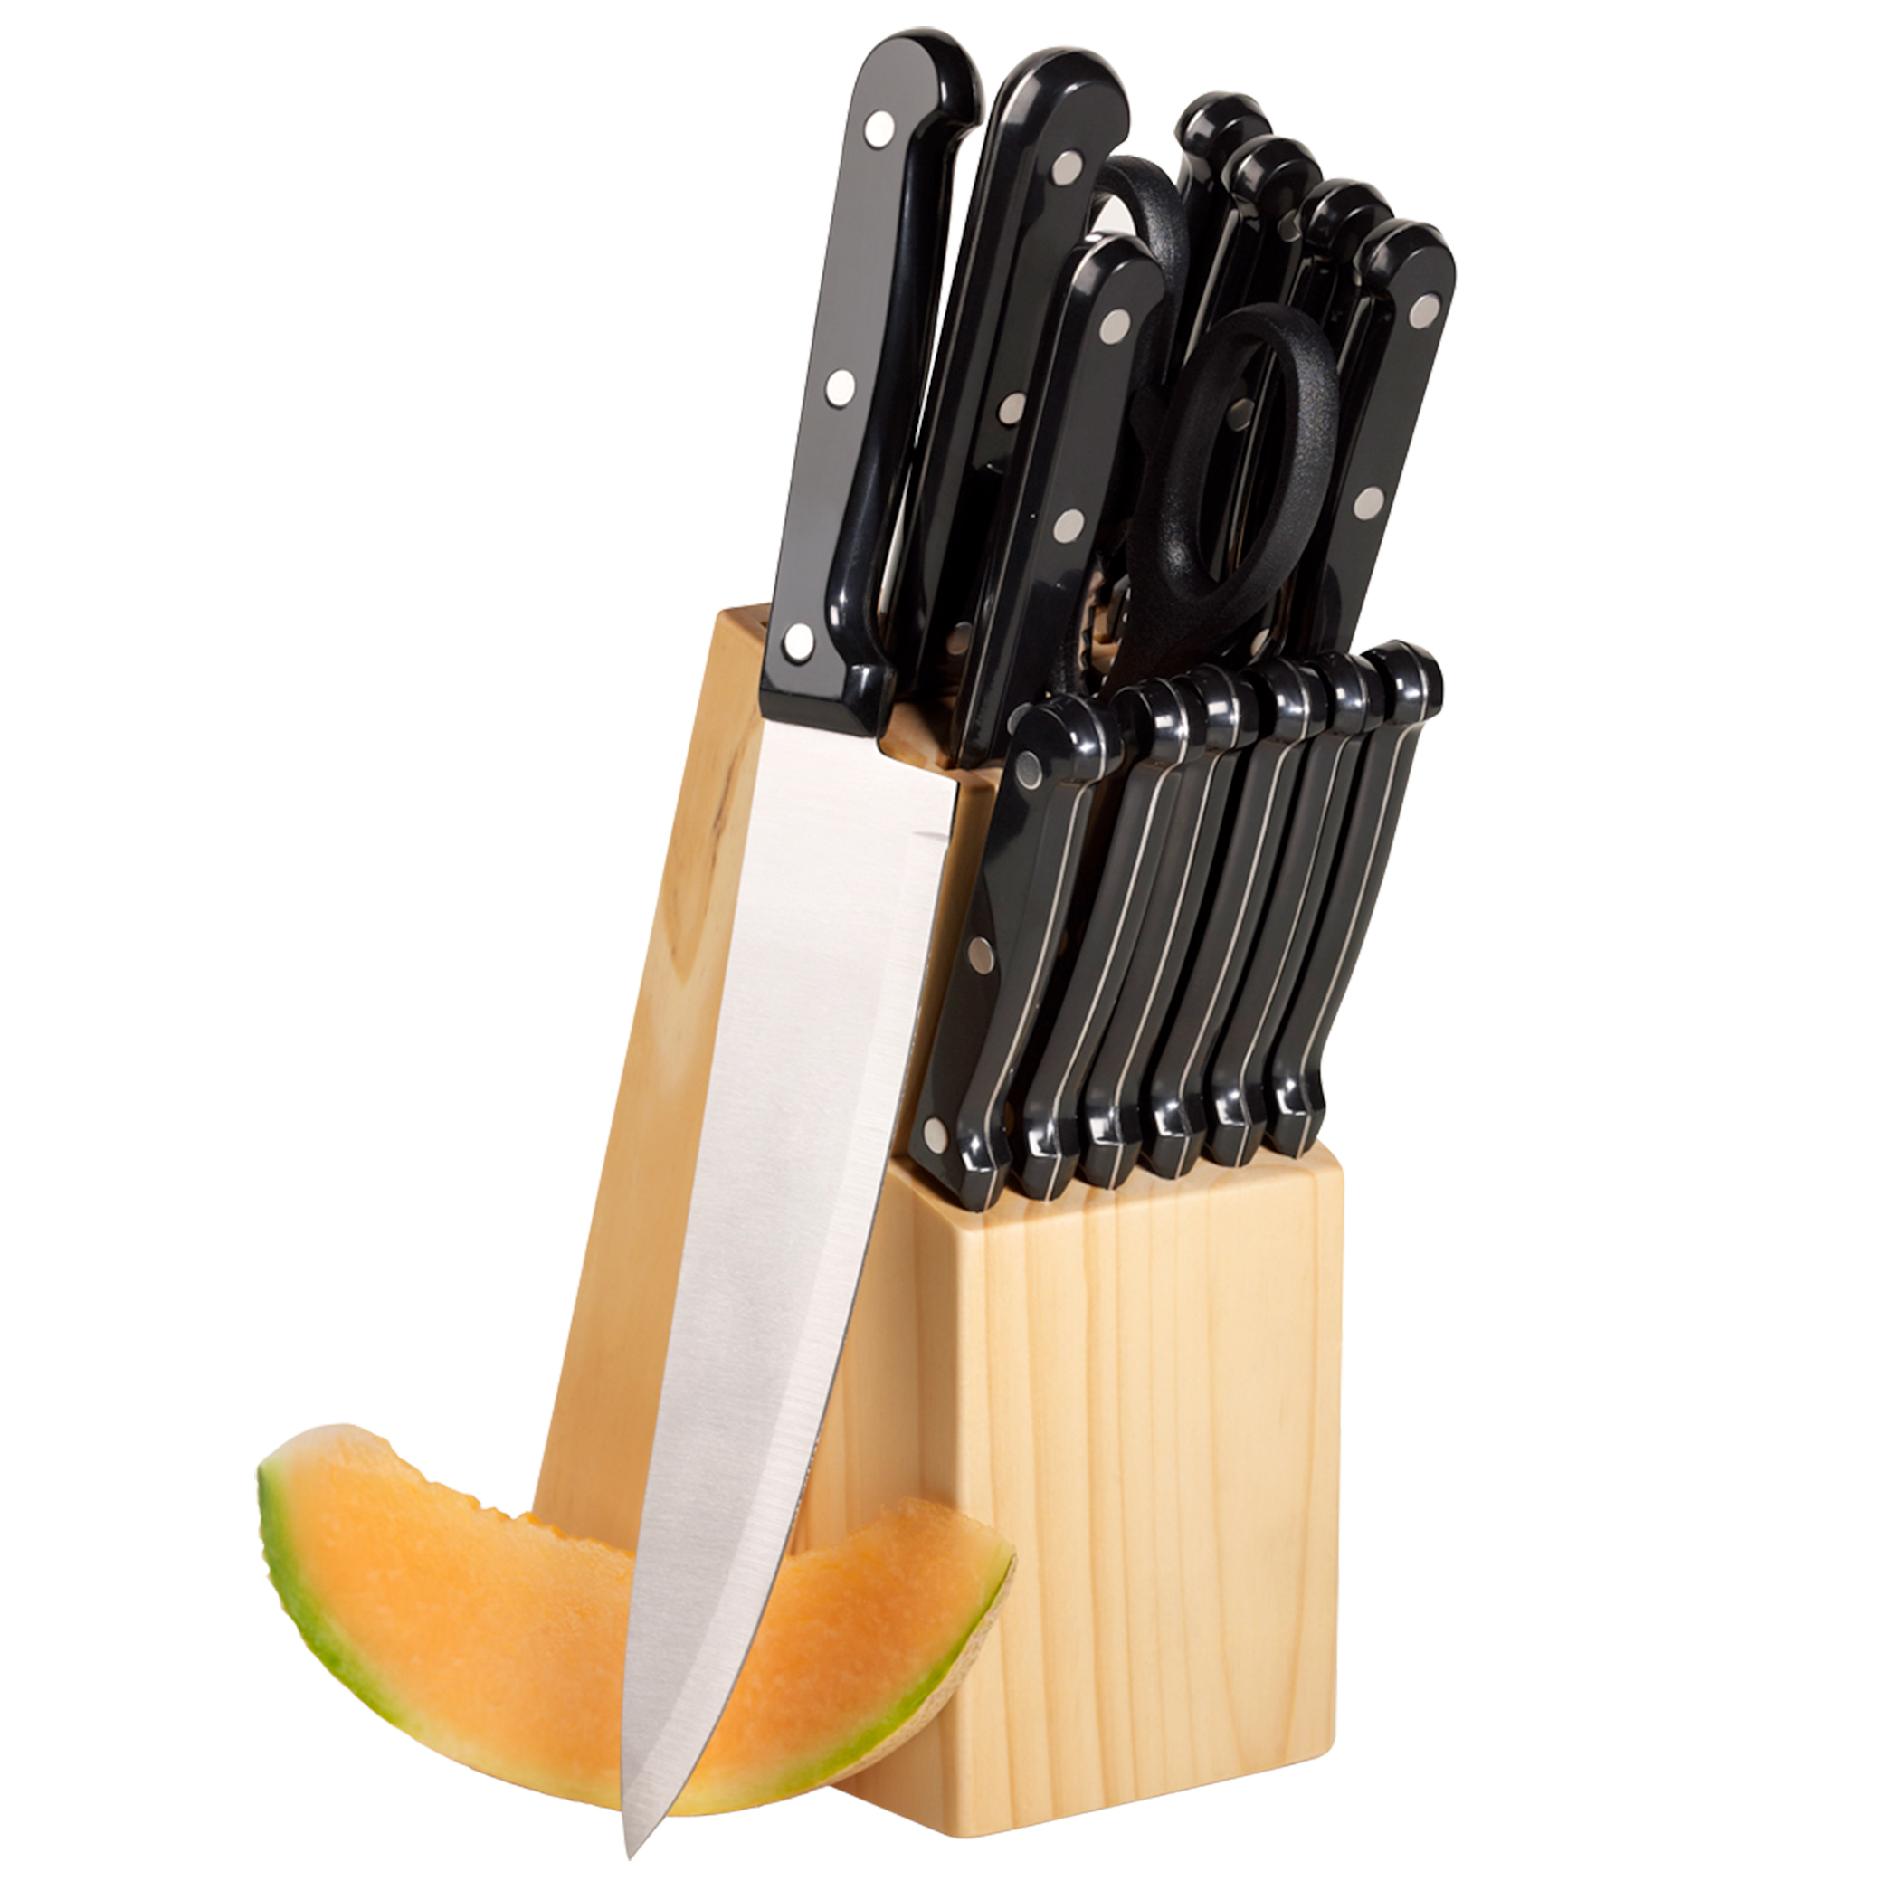 Essential Home 15 Piece Cutlery Set With Storage Block—$9.99 + $5.10 Back in SYWR Points!